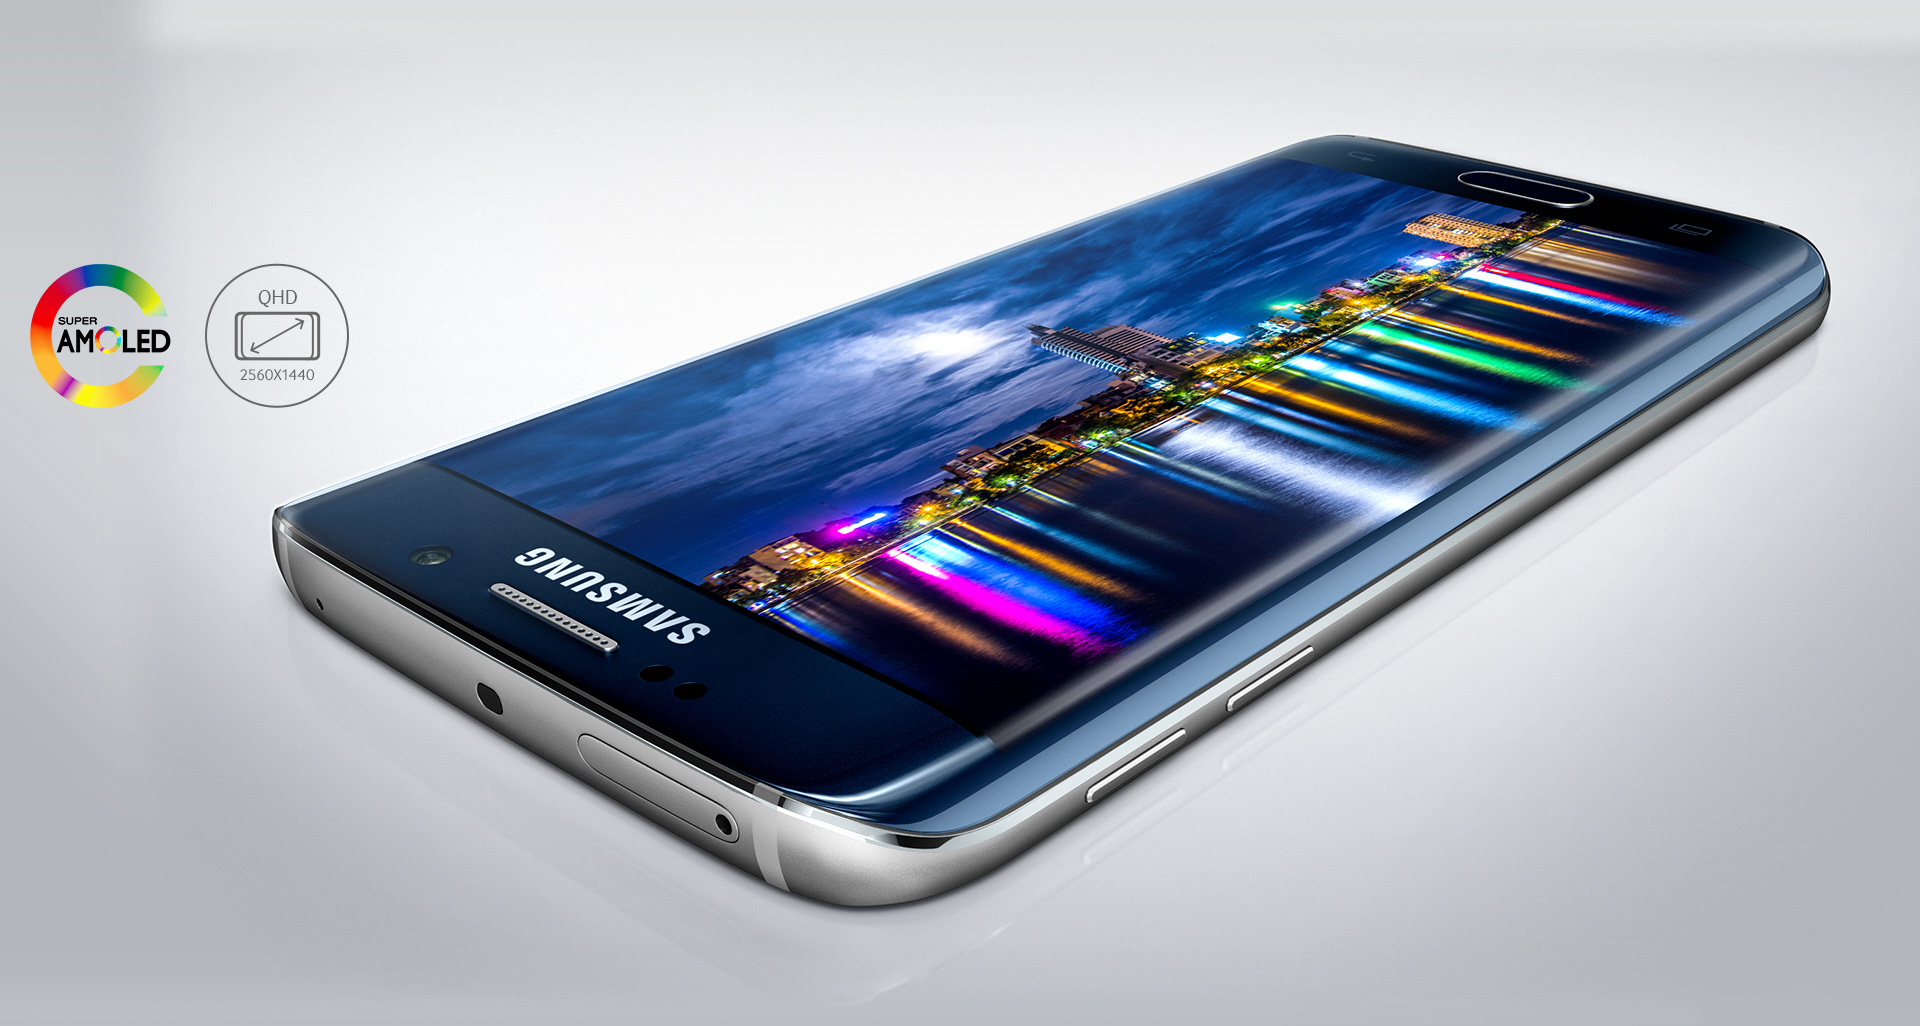 Samsung Galaxy S6 Edge Plus to feature 4 GB of RAM and Exynos 7420